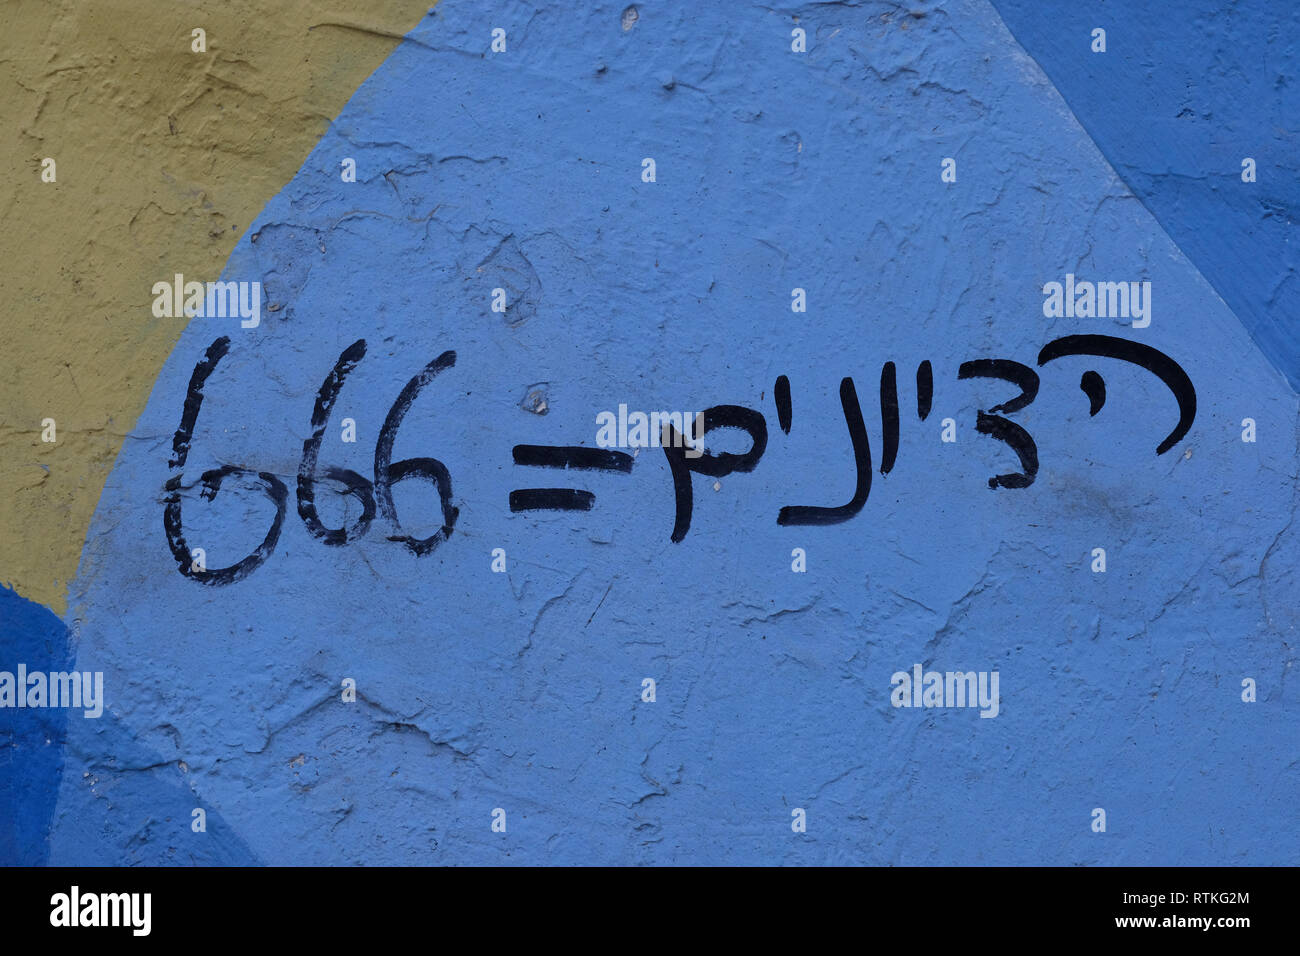 A graffiti in Hebrew sprayed by extreme anti-Zionist Haredi Jews compares Zionism to the number 666 which represents the devil in Mea Shearim ultra orthodox neighborhood in West Jerusalem Israel Stock Photo